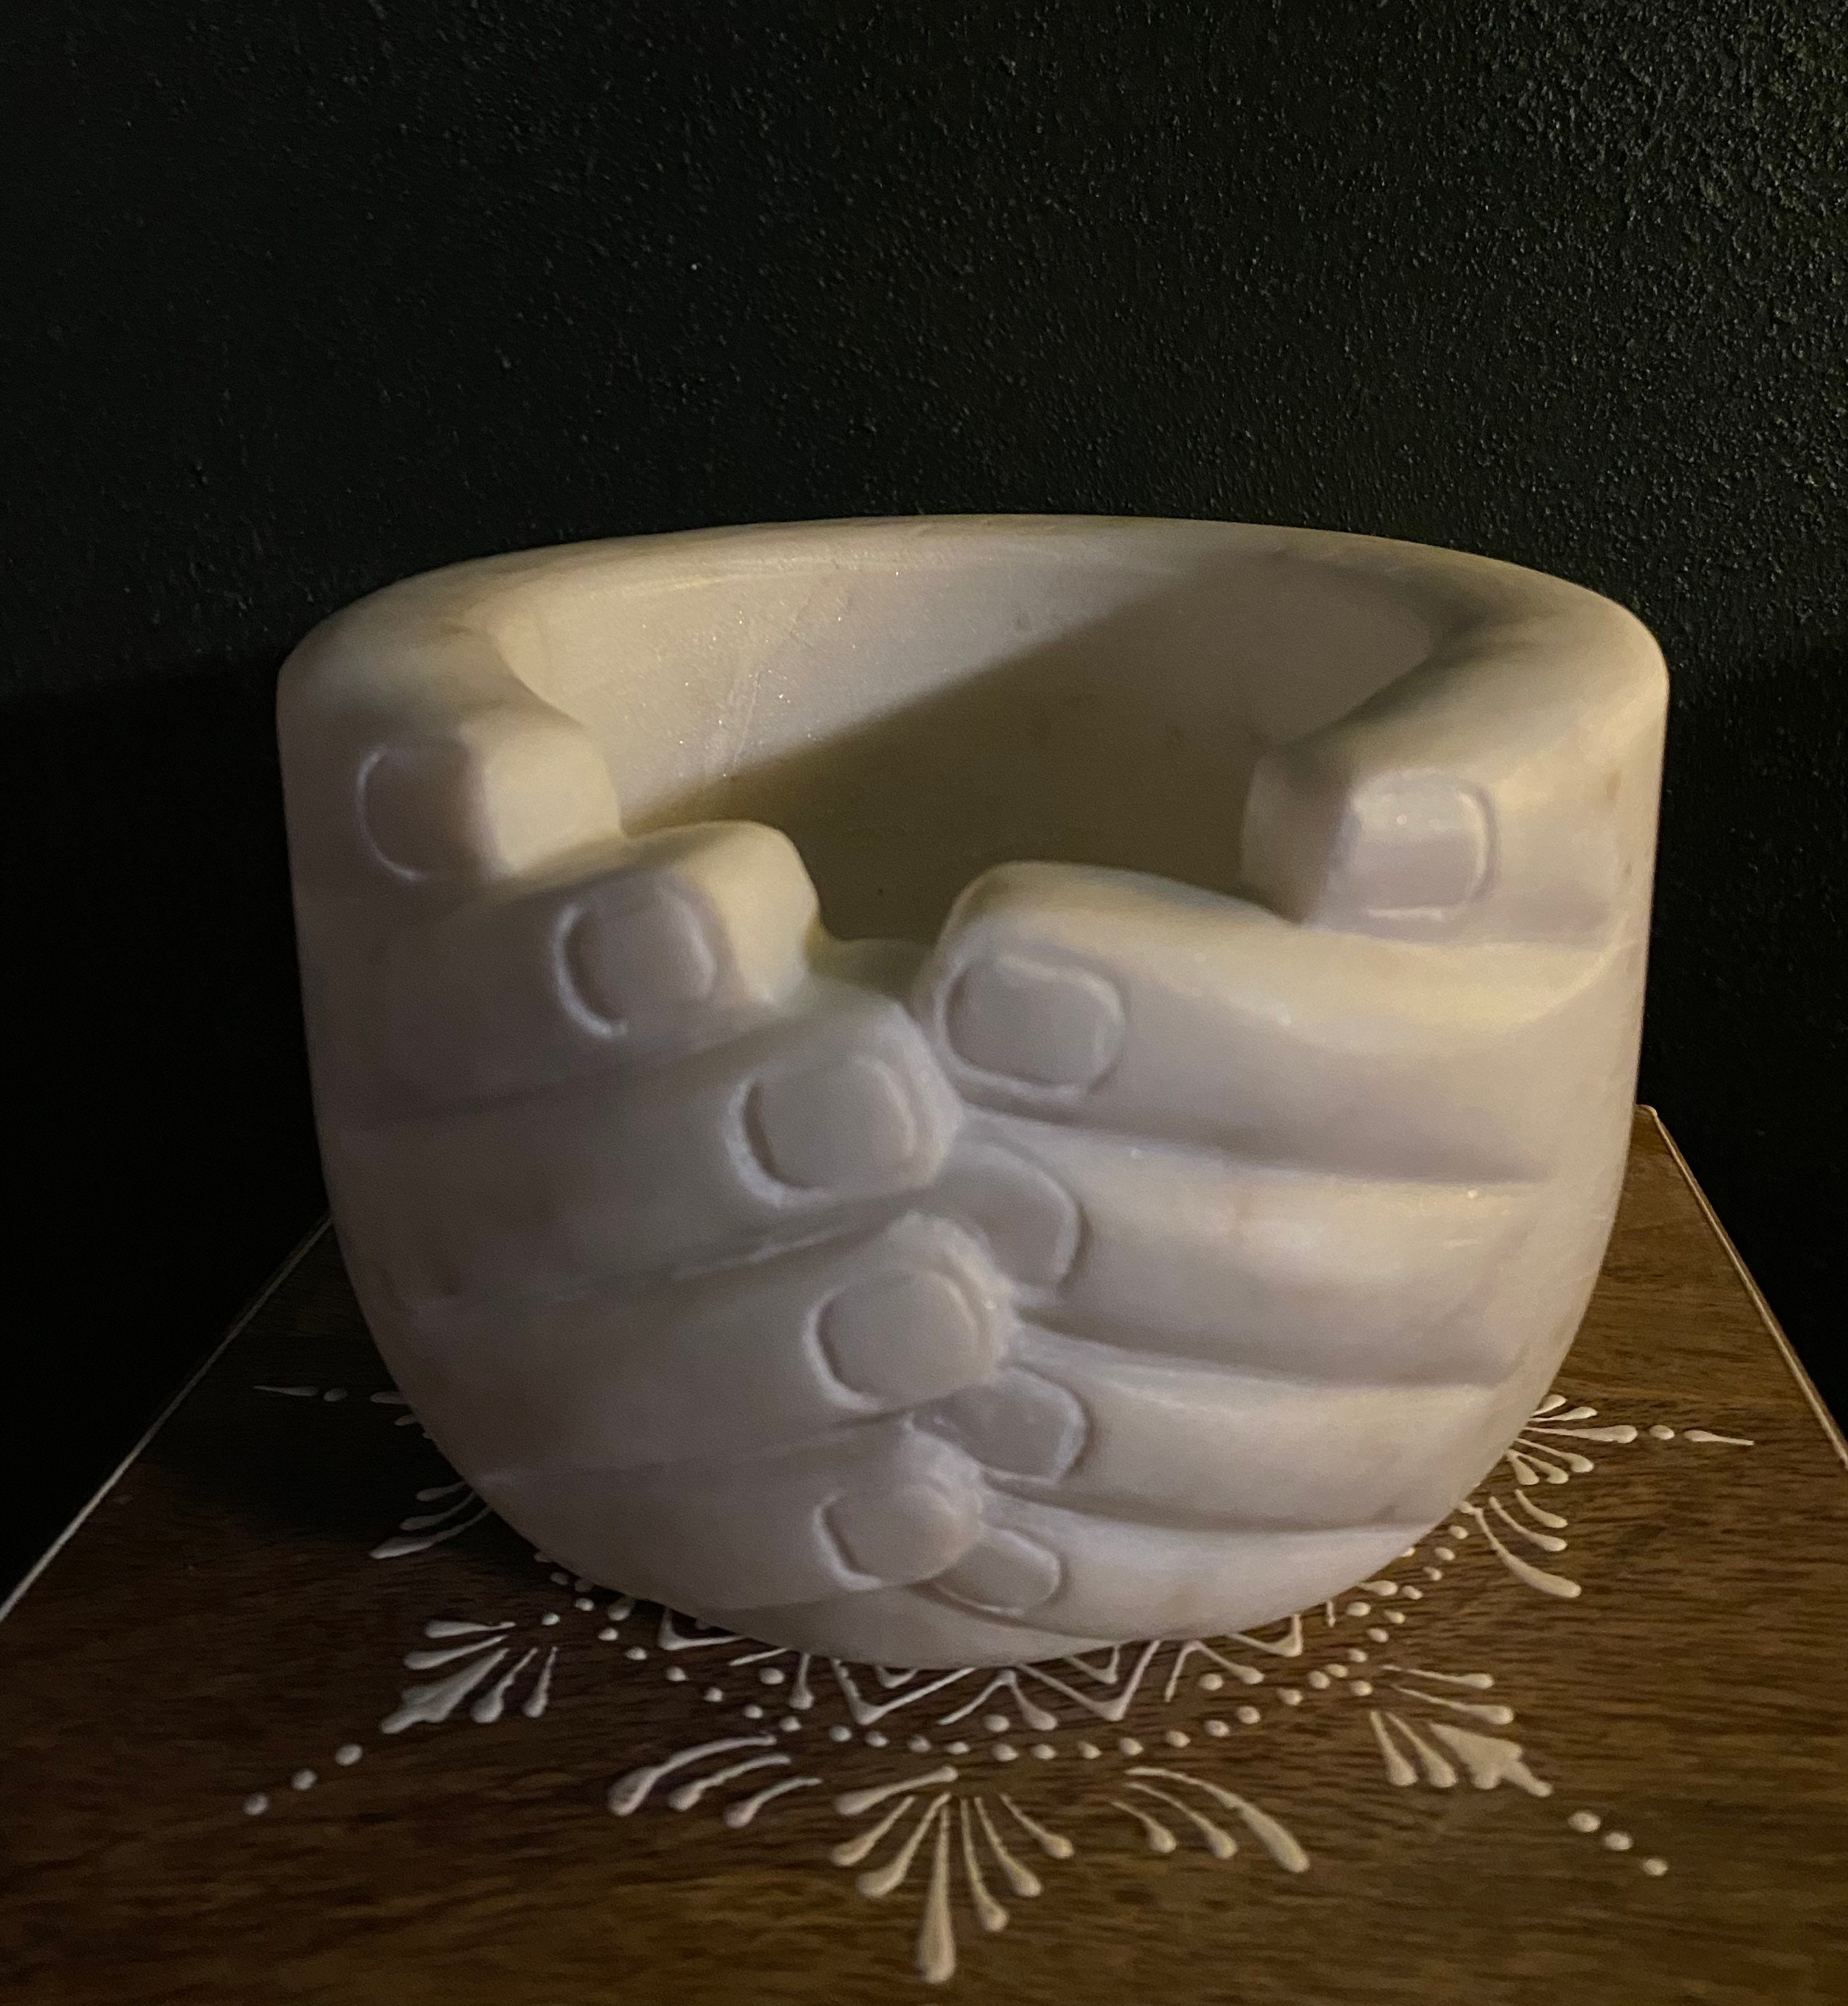 Solid Marble Hands Blessing Bowl White Marble 6 LBS RIT7947 5.75 OD x 4.0 ID x 4.50 Deep